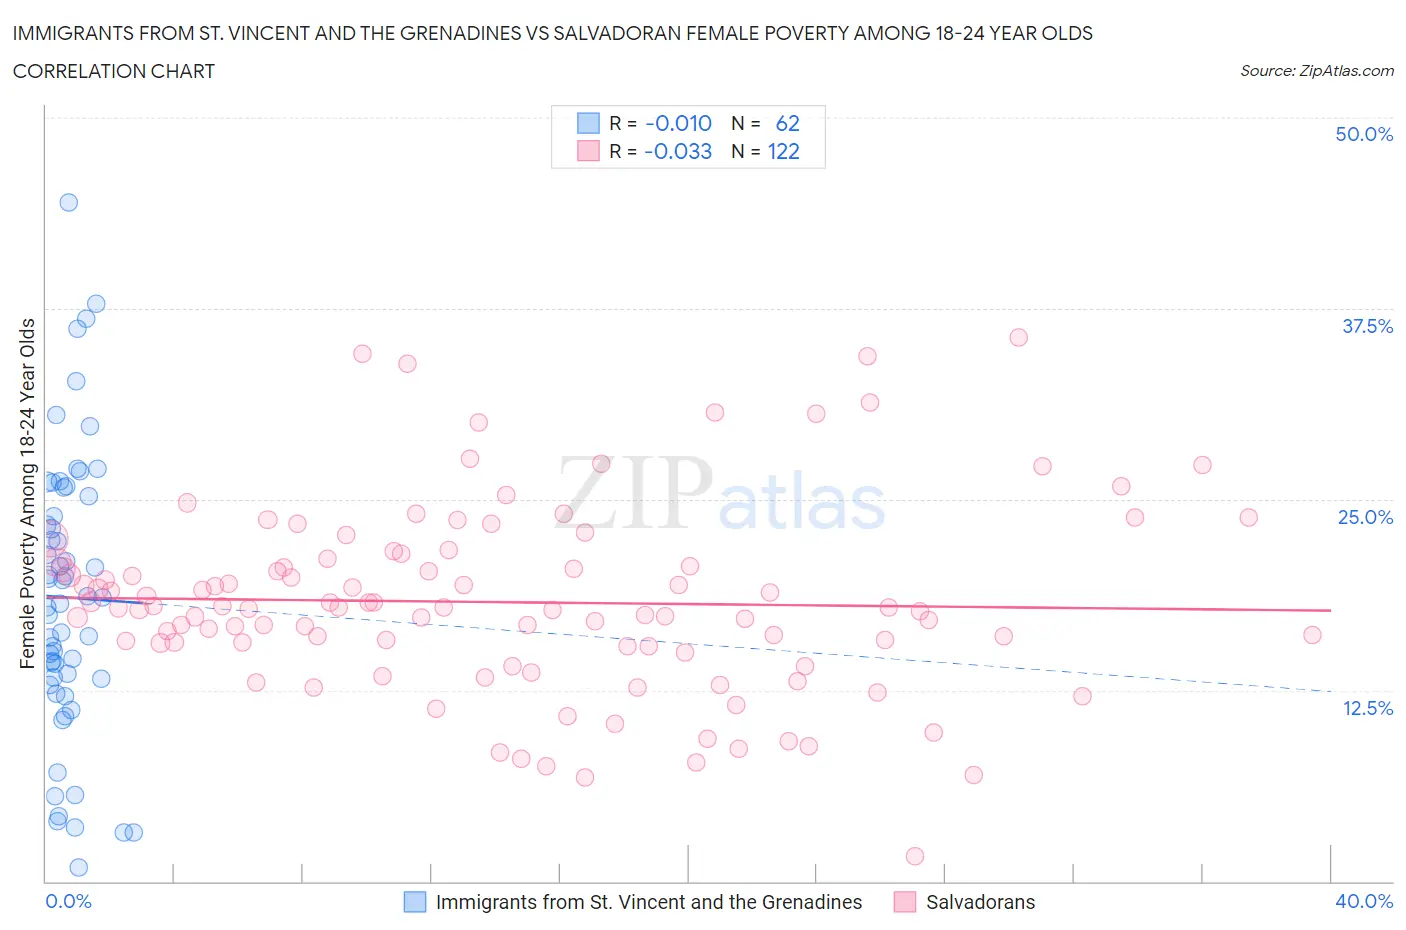 Immigrants from St. Vincent and the Grenadines vs Salvadoran Female Poverty Among 18-24 Year Olds